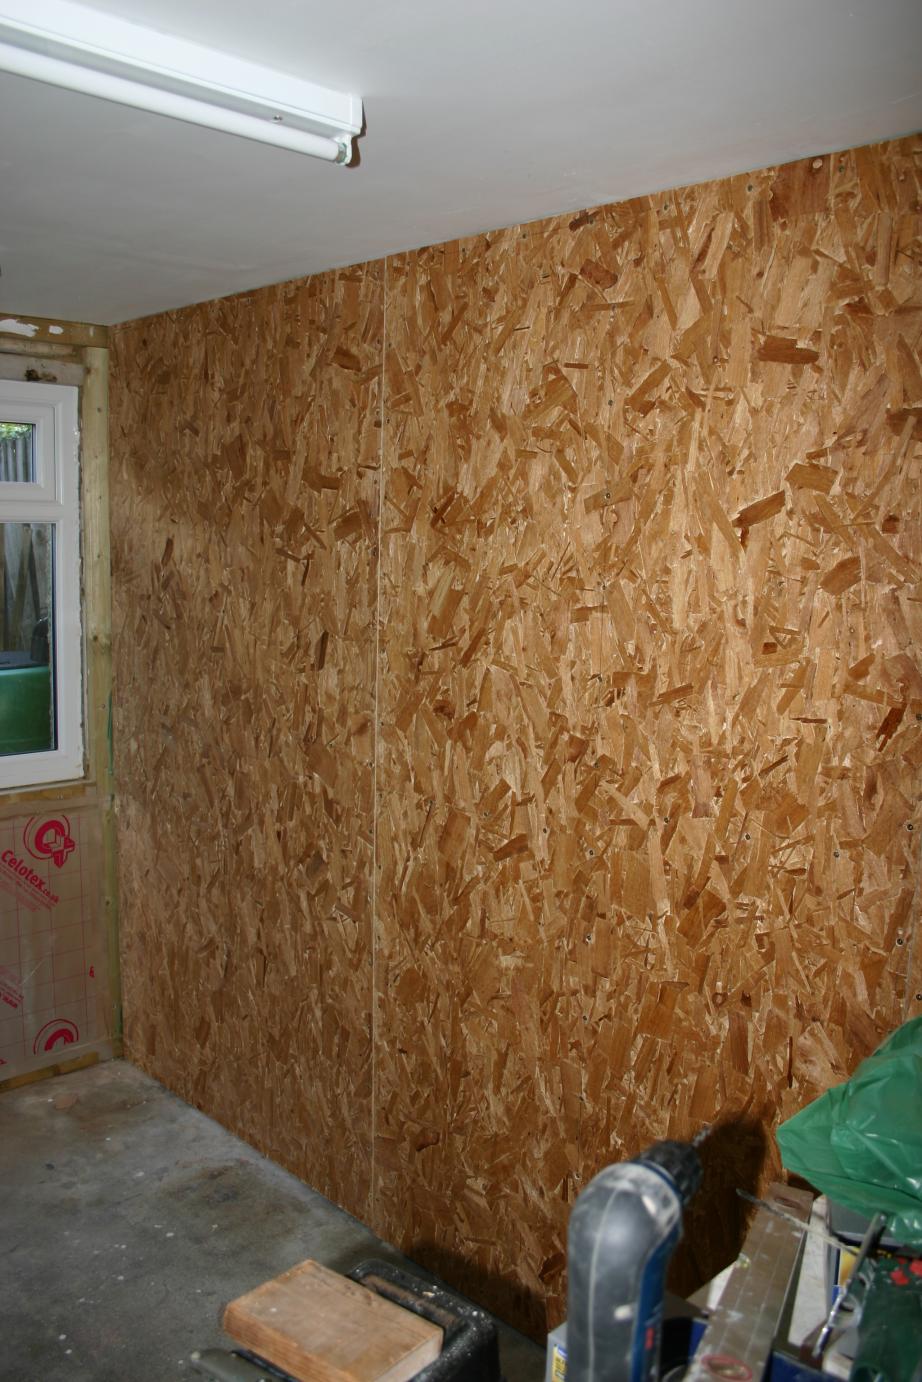 Sheathing with OSB completed, 12th September 2015.